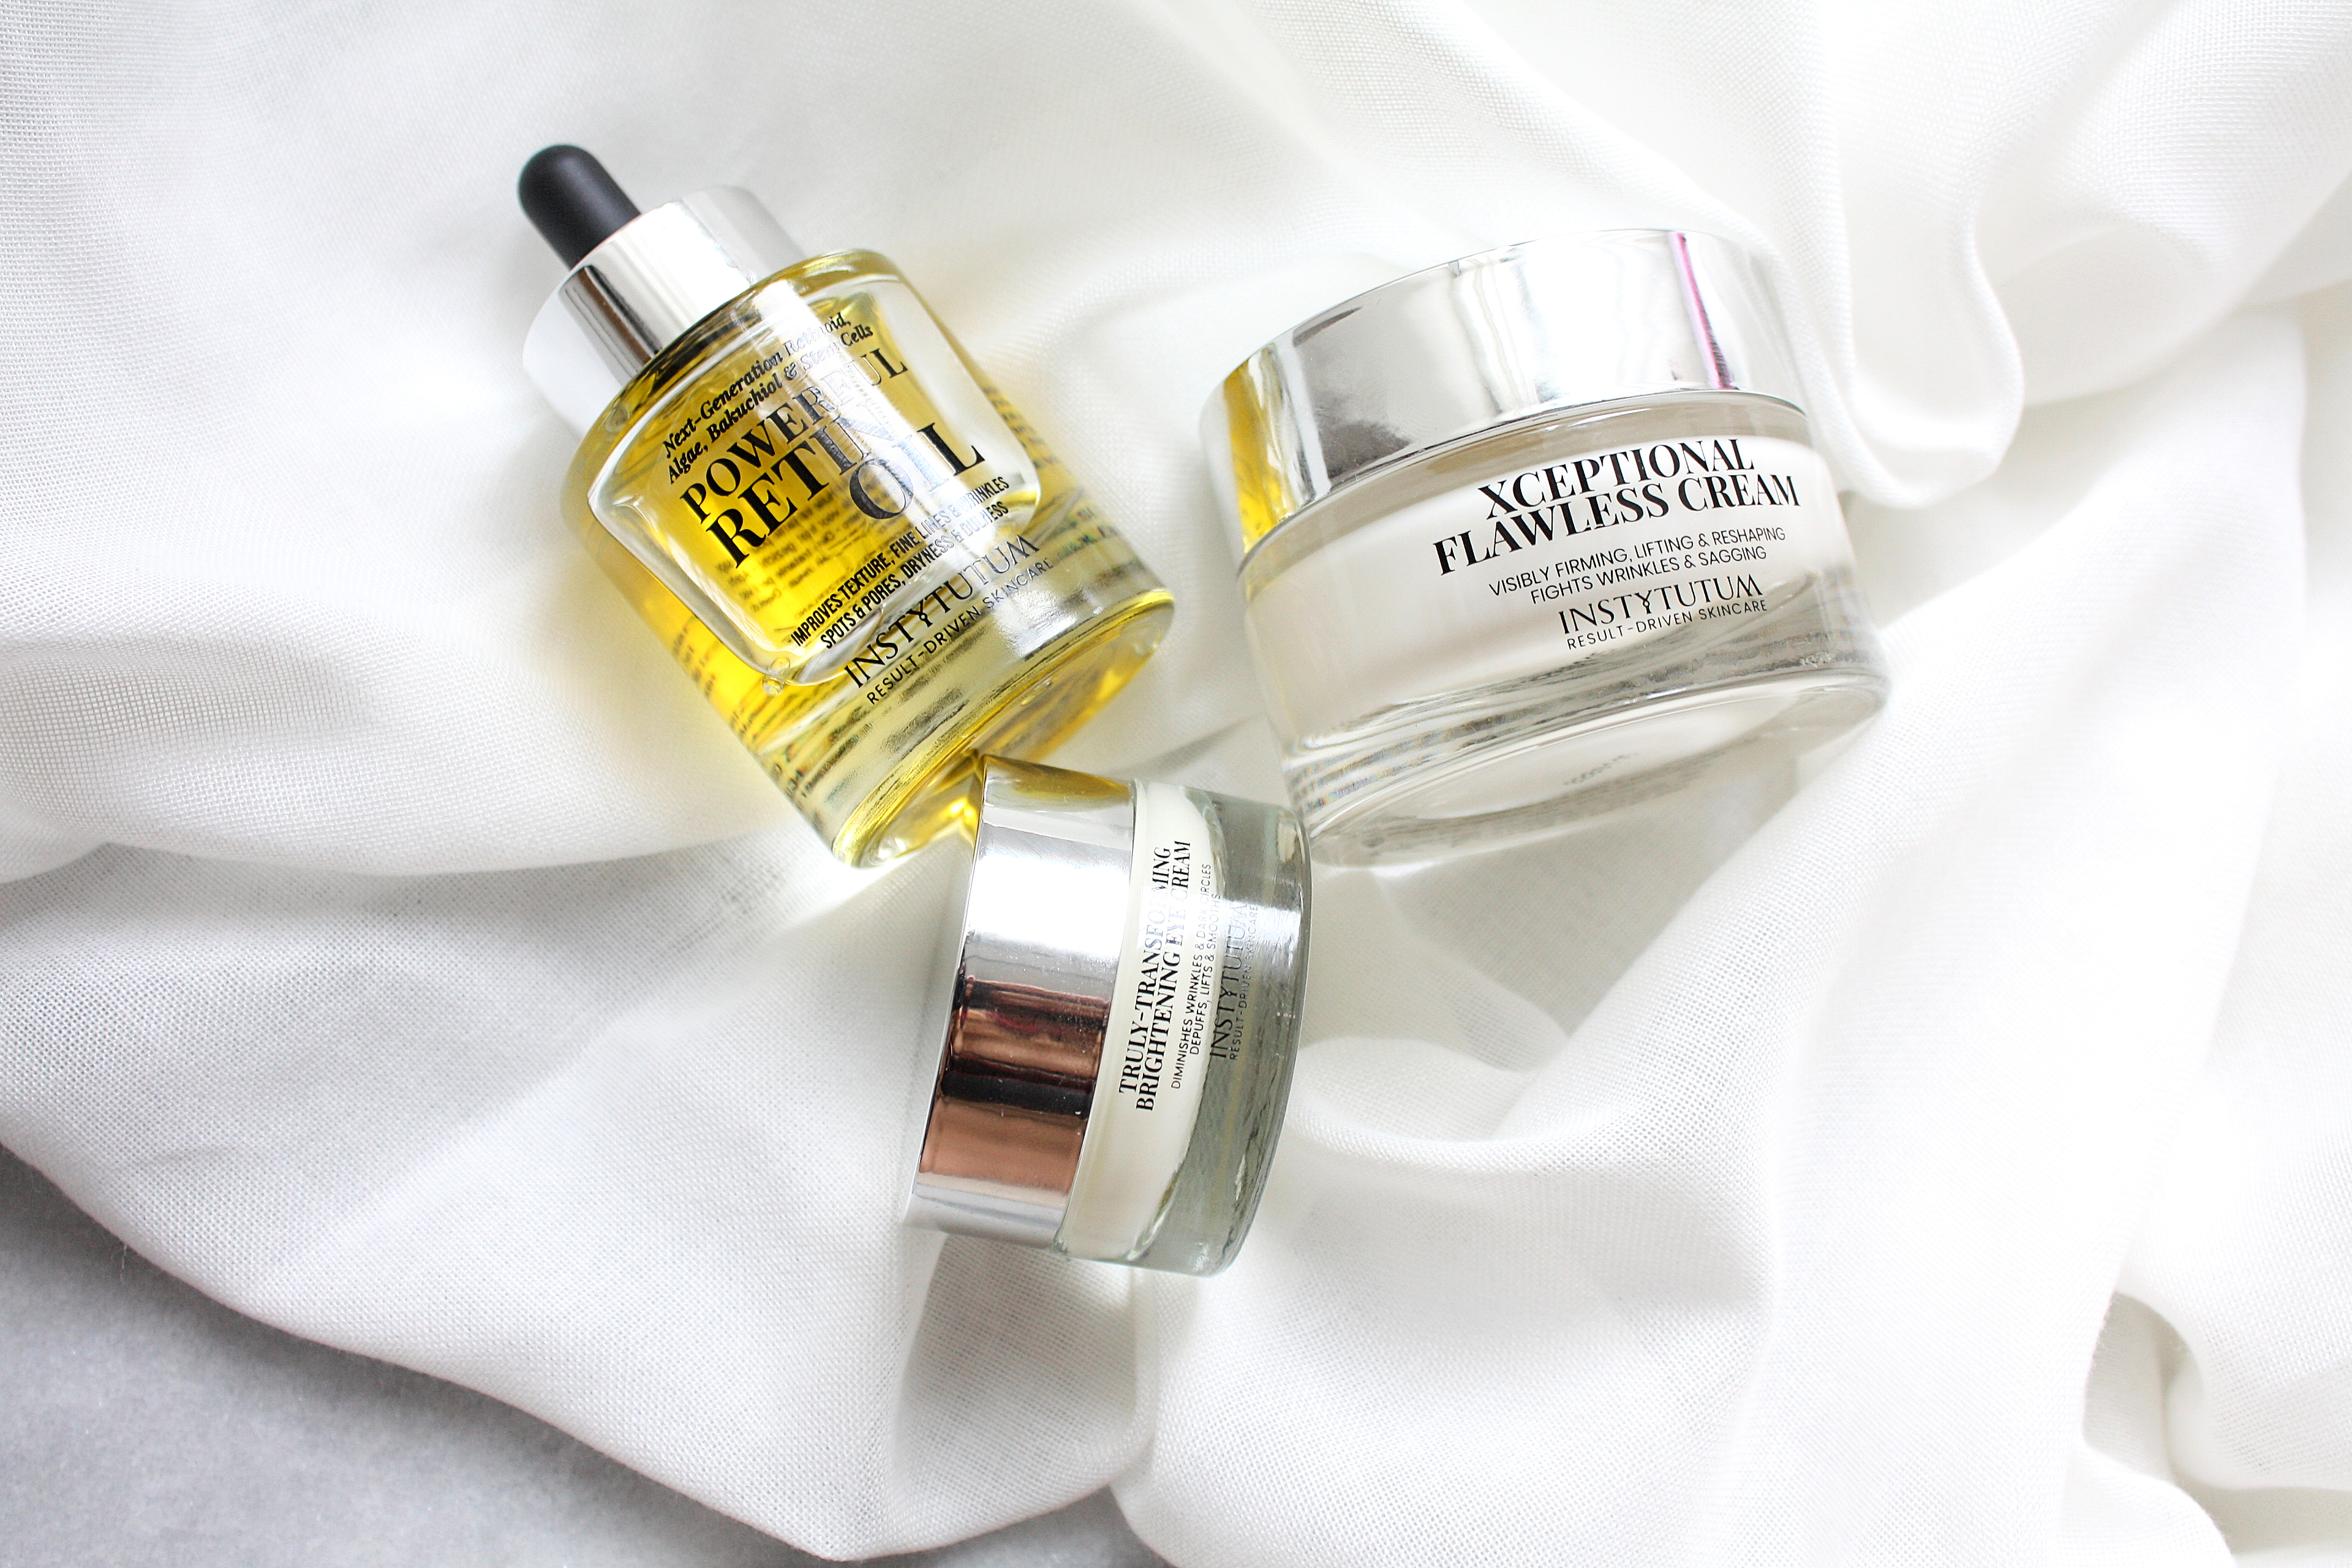 FLAWLESS SKIN WITH INSTYTUTUM SKINCARE